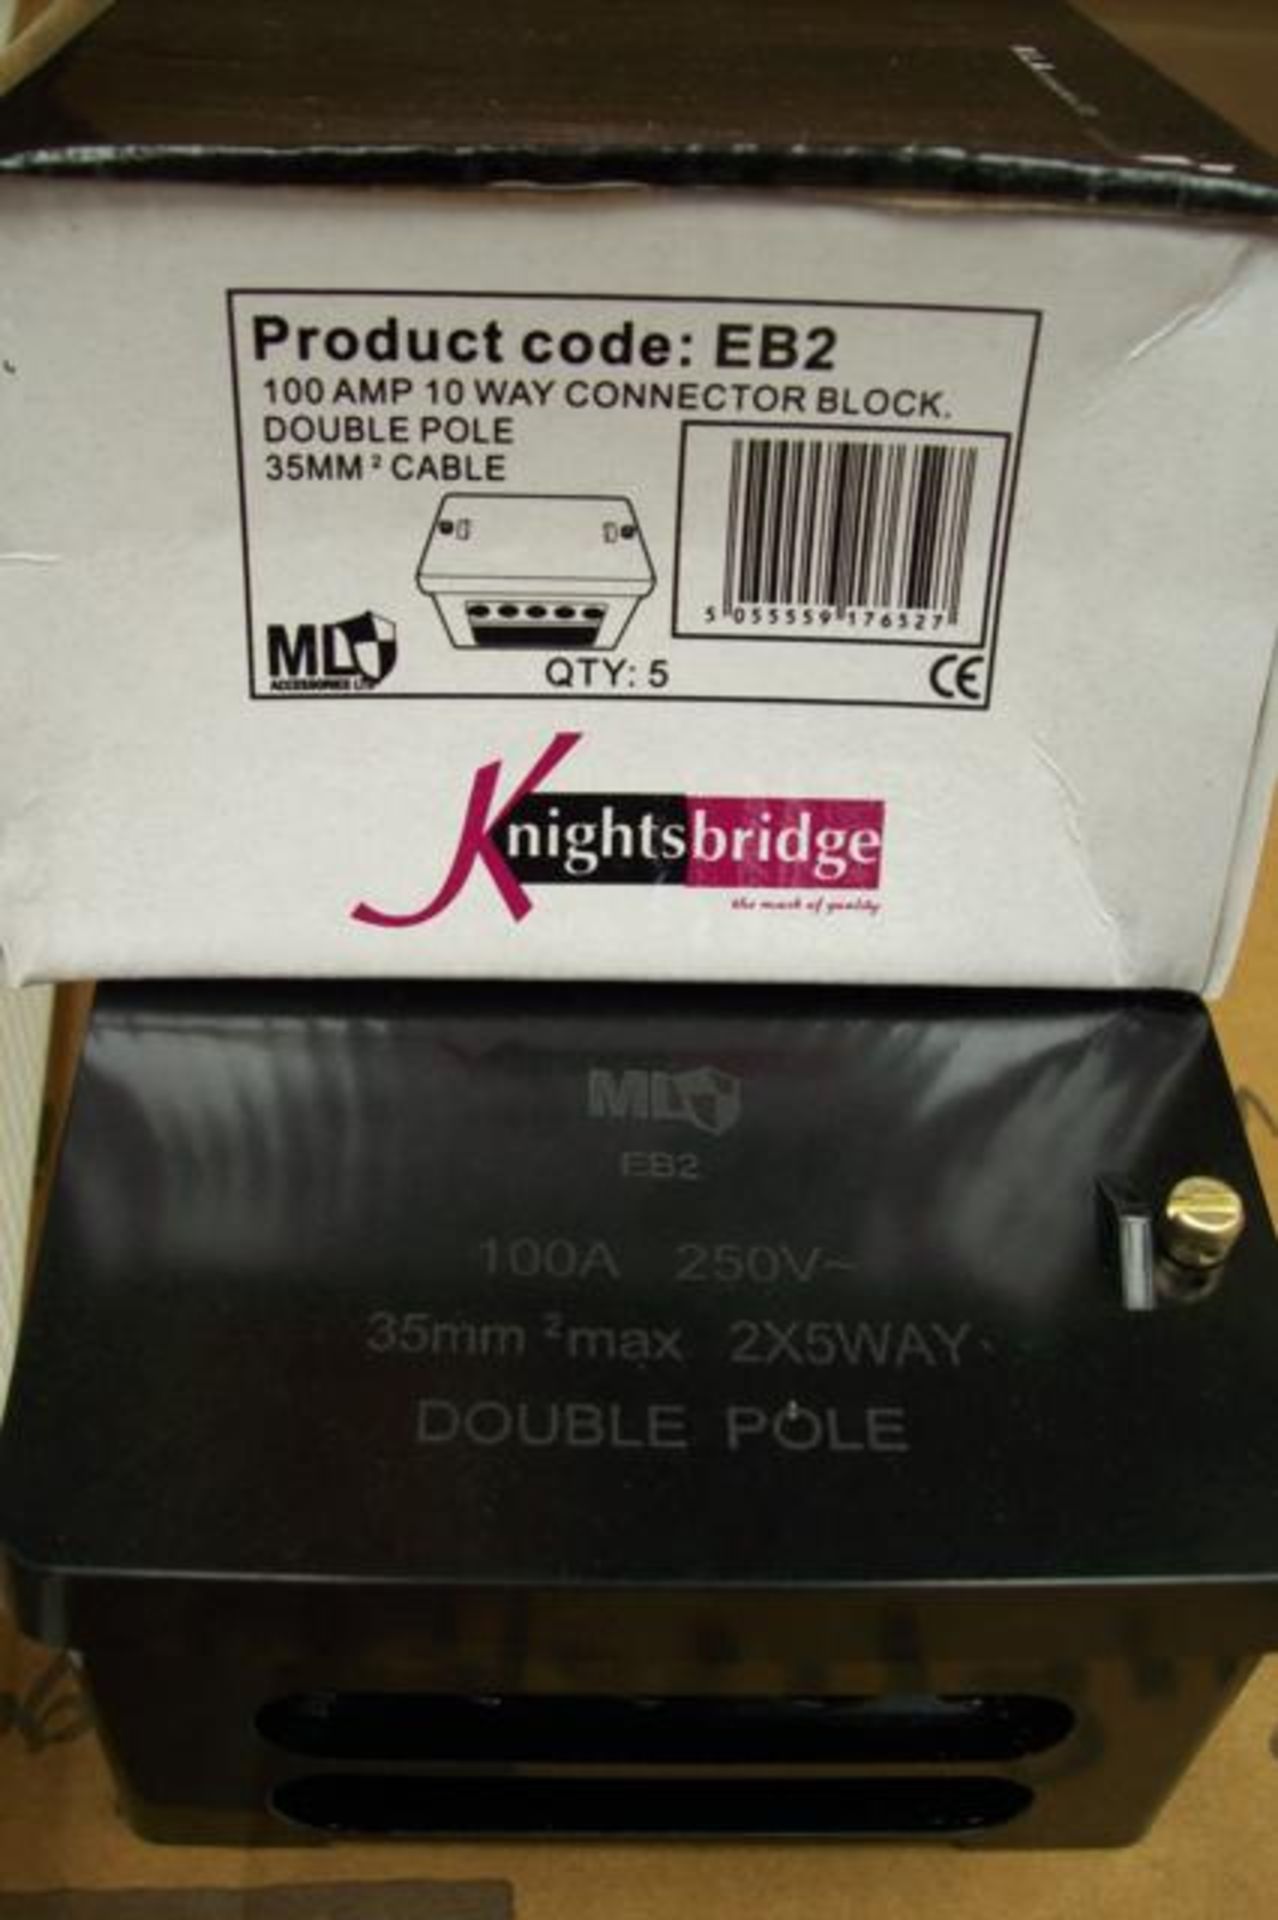 50 x Knightsbridge 100A 10way Connector Block Double Pole 35mm Cable Block